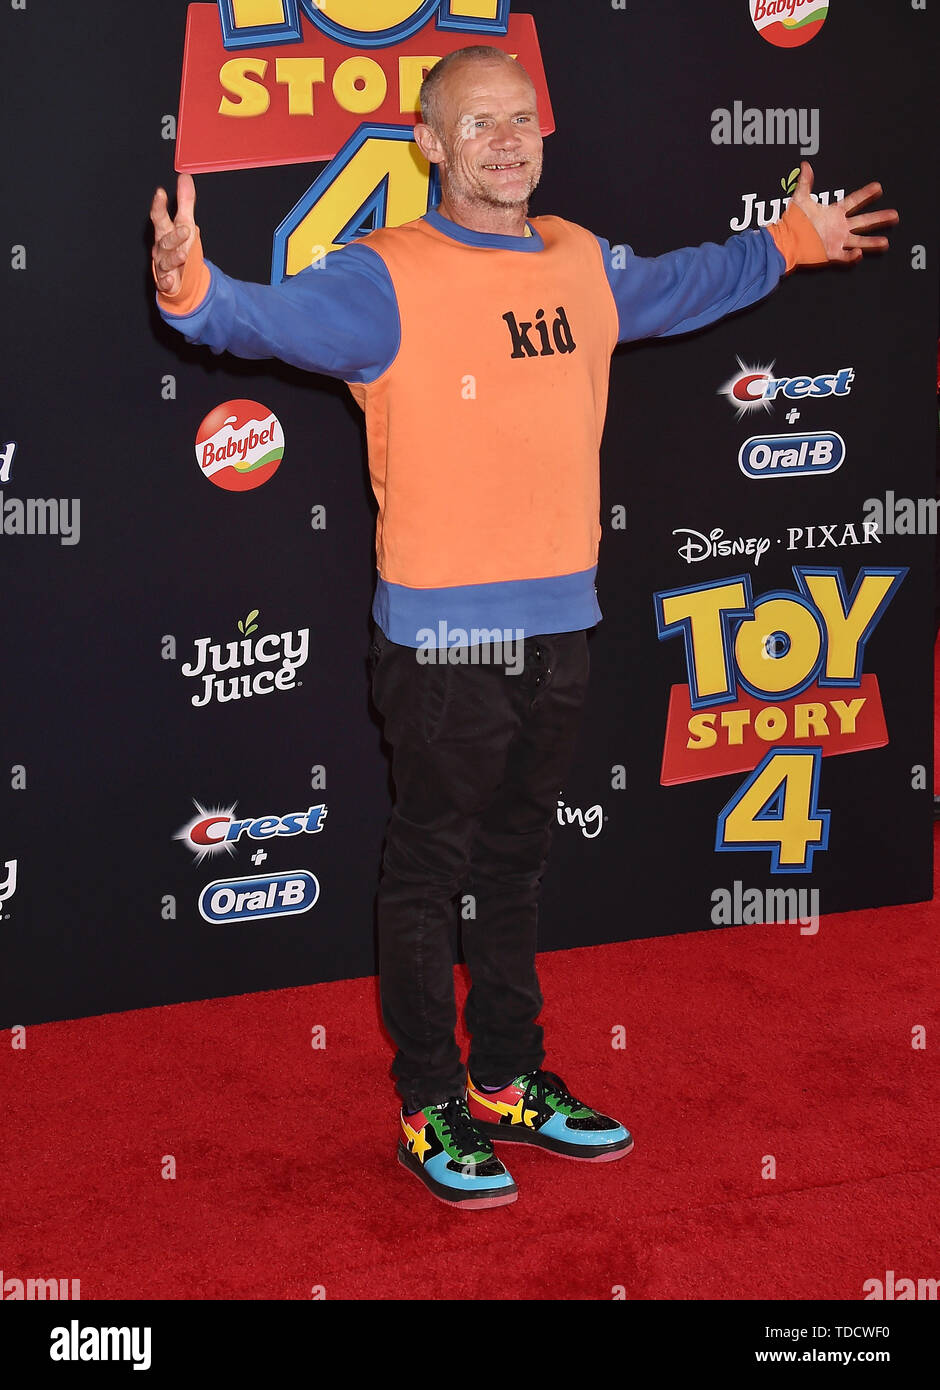 HOLLYWOOD, CA - JUNE 11: Flea arrives at the premiere of Disney and Pixar's 'Toy Story 4' at the El Capitan Theatre on June 11, 2019 in Los Angeles, California. Stock Photo